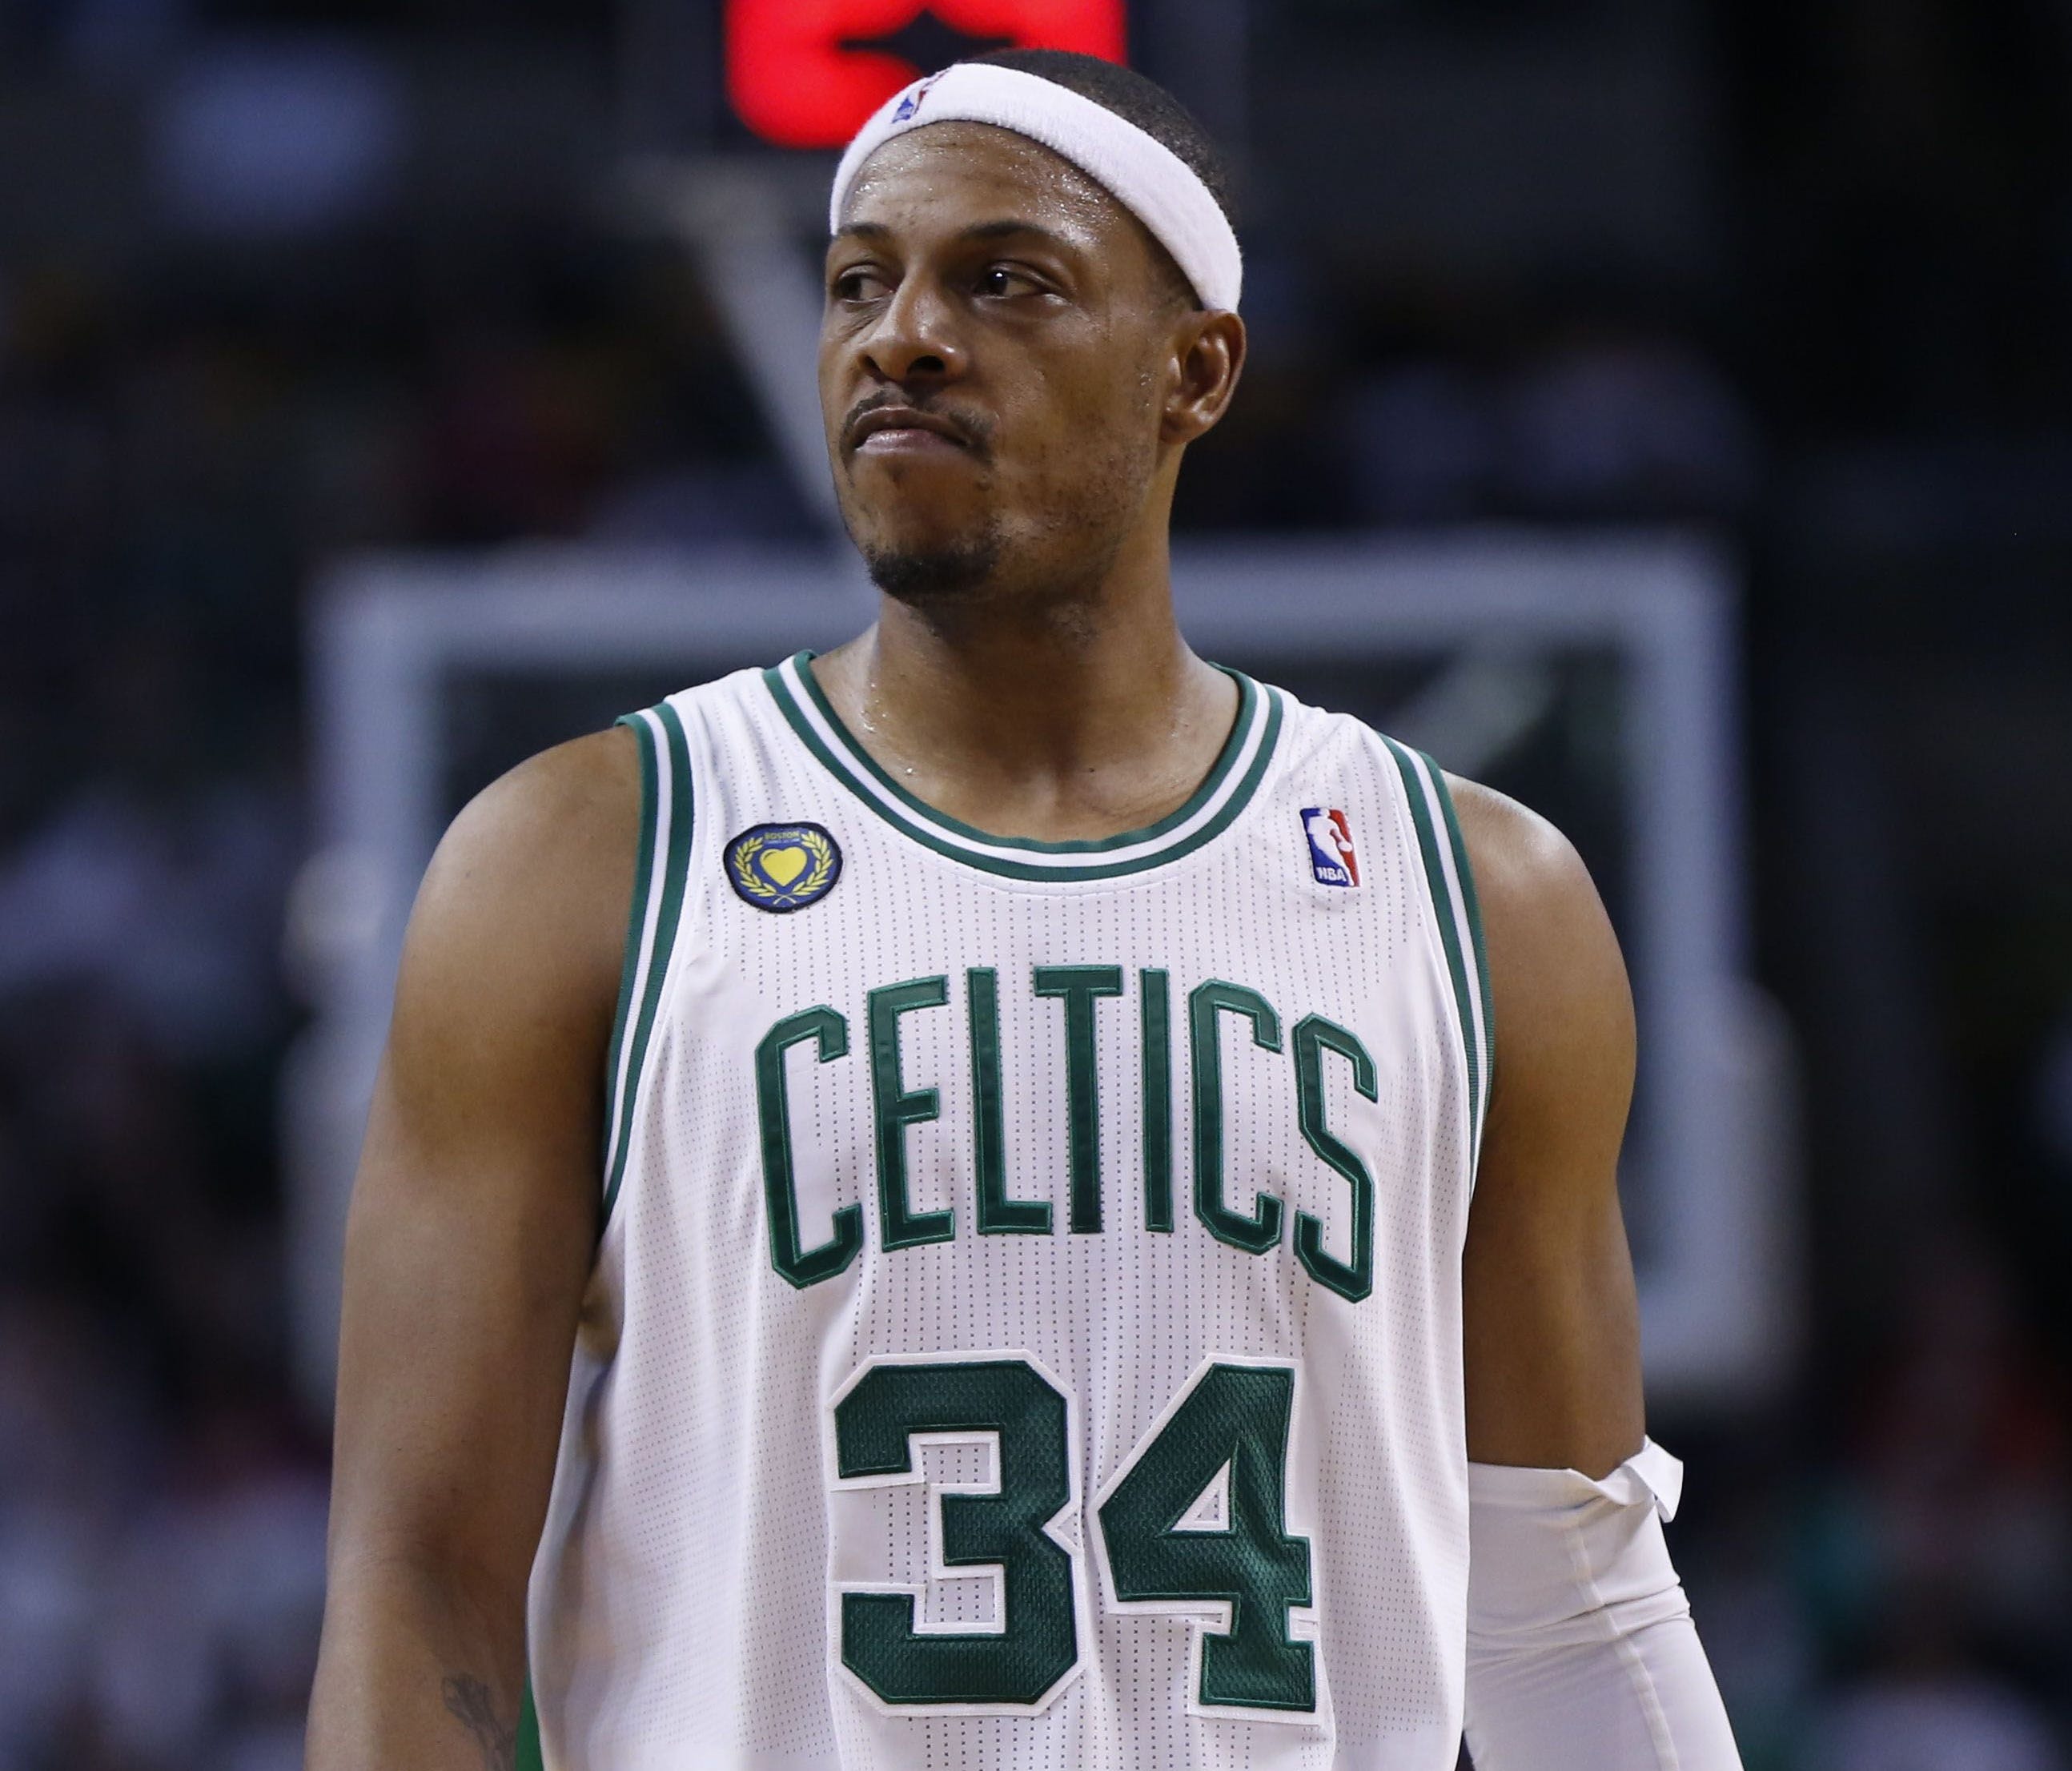 Boston Celtics small forward Paul Pierce (34) walks off the court during the third quarter of game three of the first round of the 2013 NBA playoffs.